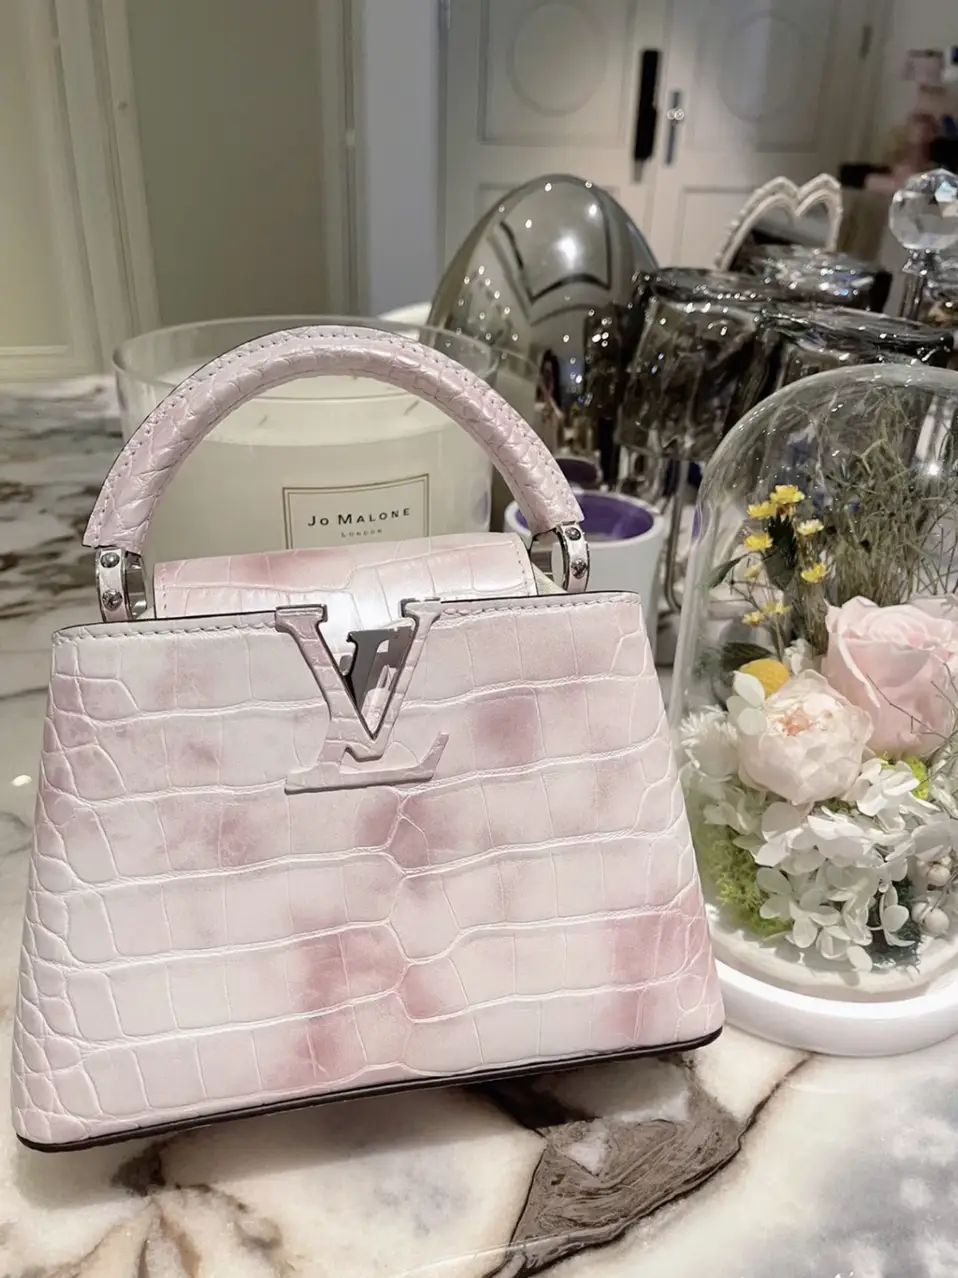 LV's most beautiful pink crocodile 💼🌸, Gallery posted by Planetttttt